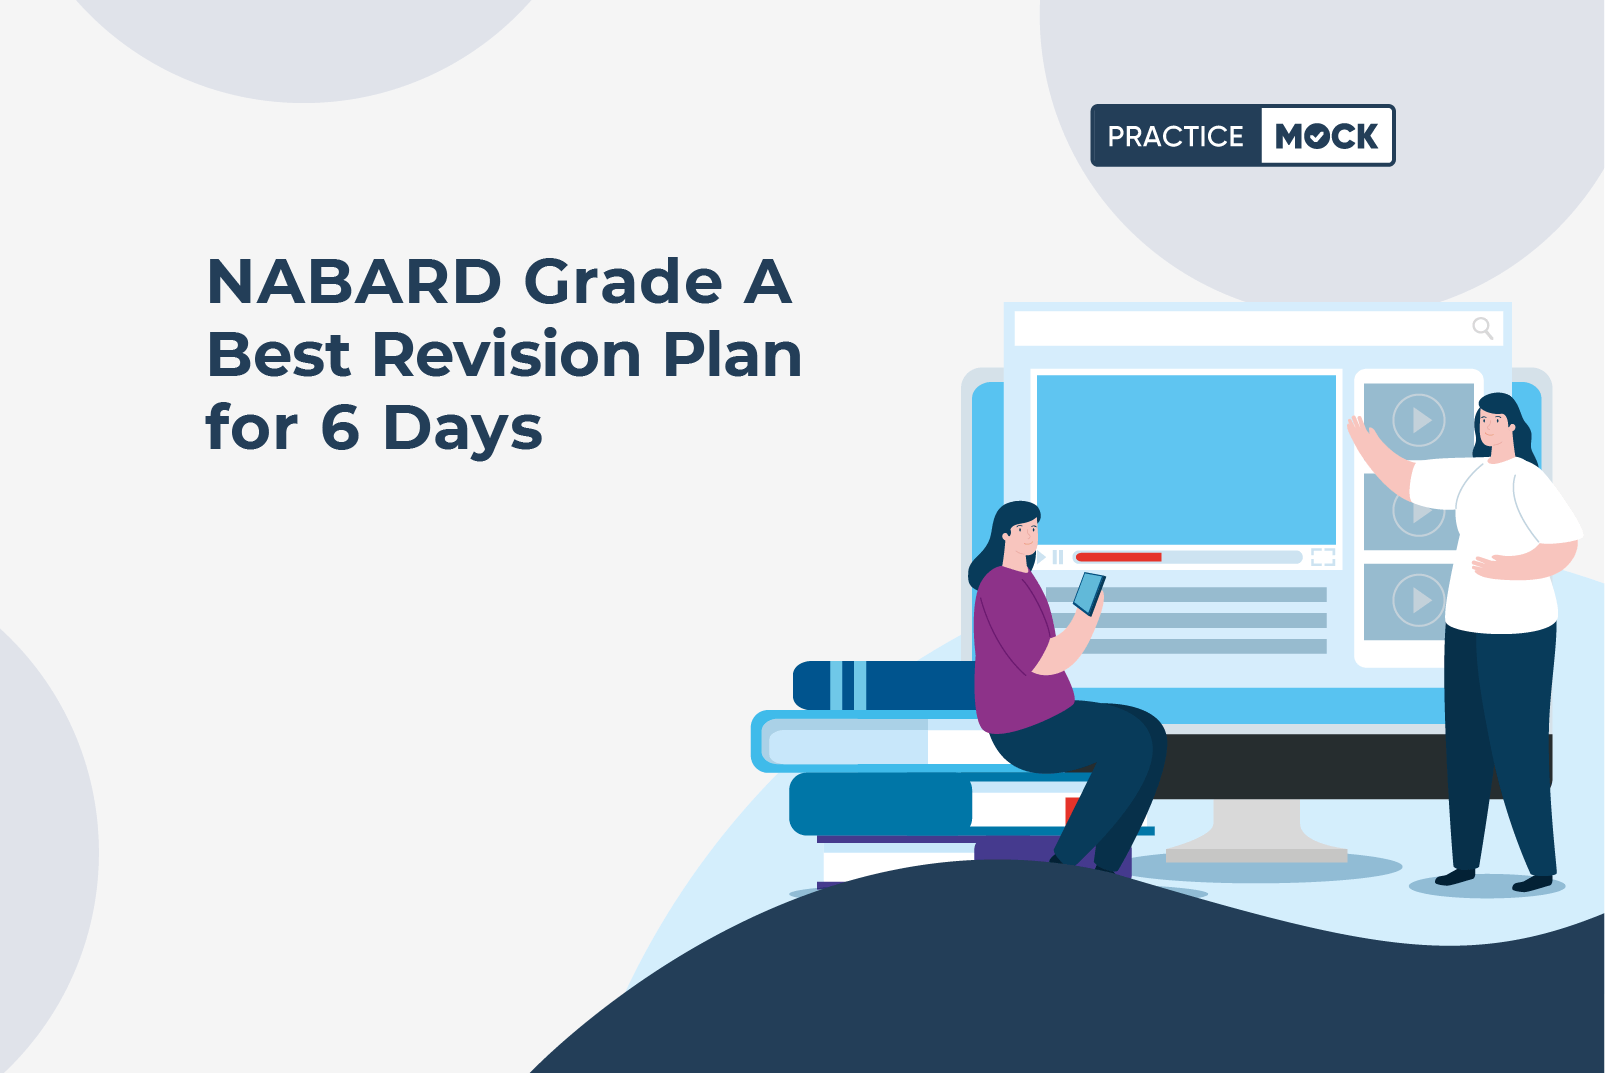 NABARD Grade A Best Revision Plan for 6 Days